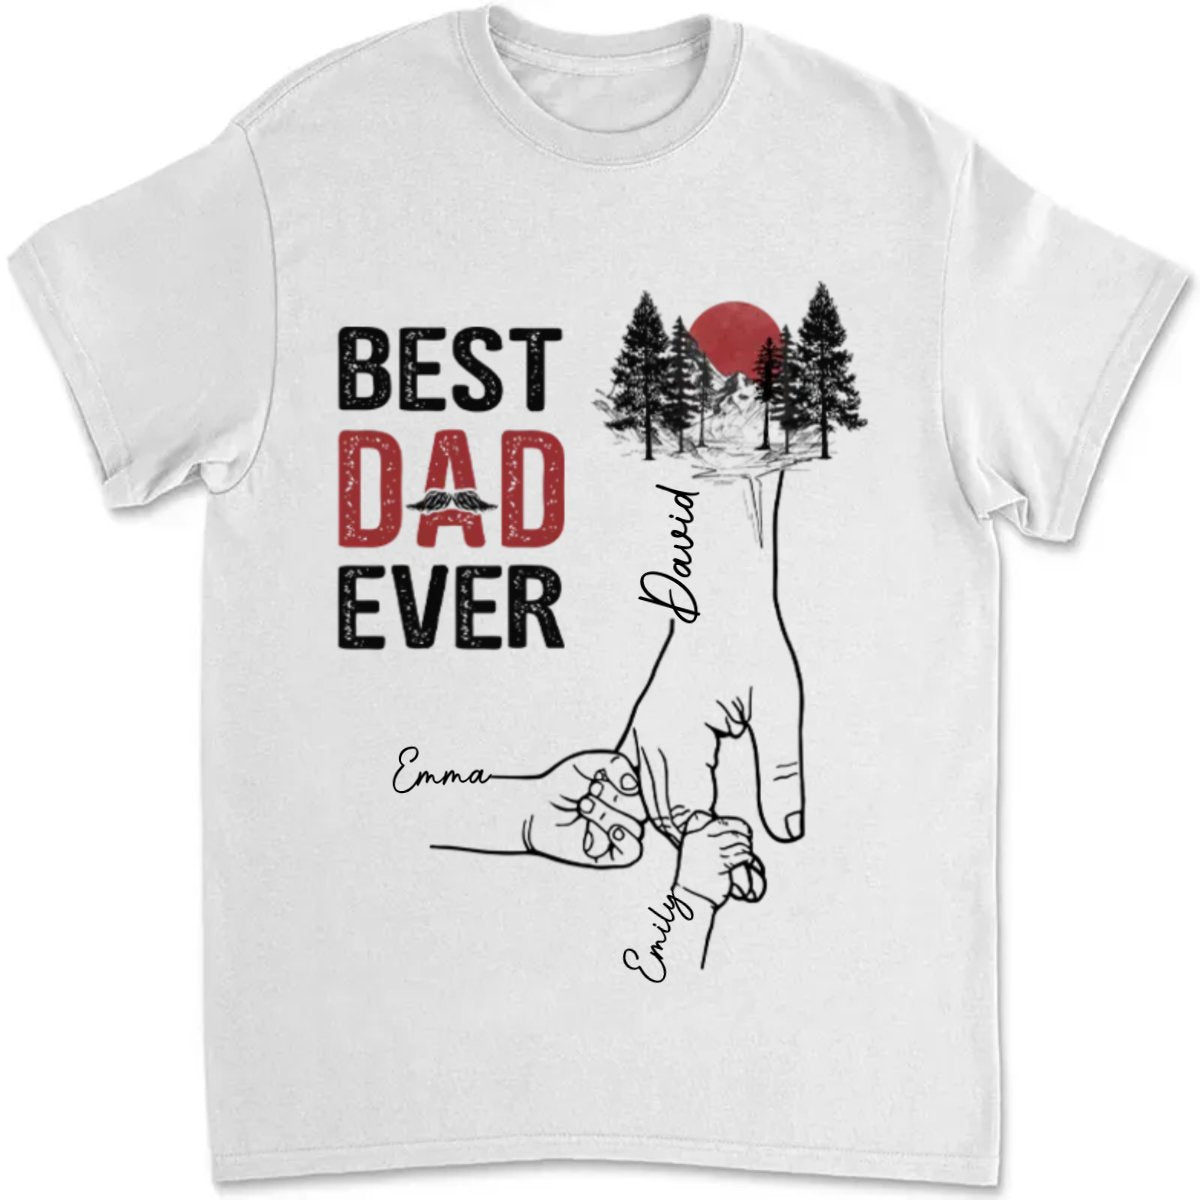 Family - The Best Dad Ever - Personalized T - Shirt - The Next Custom Gift